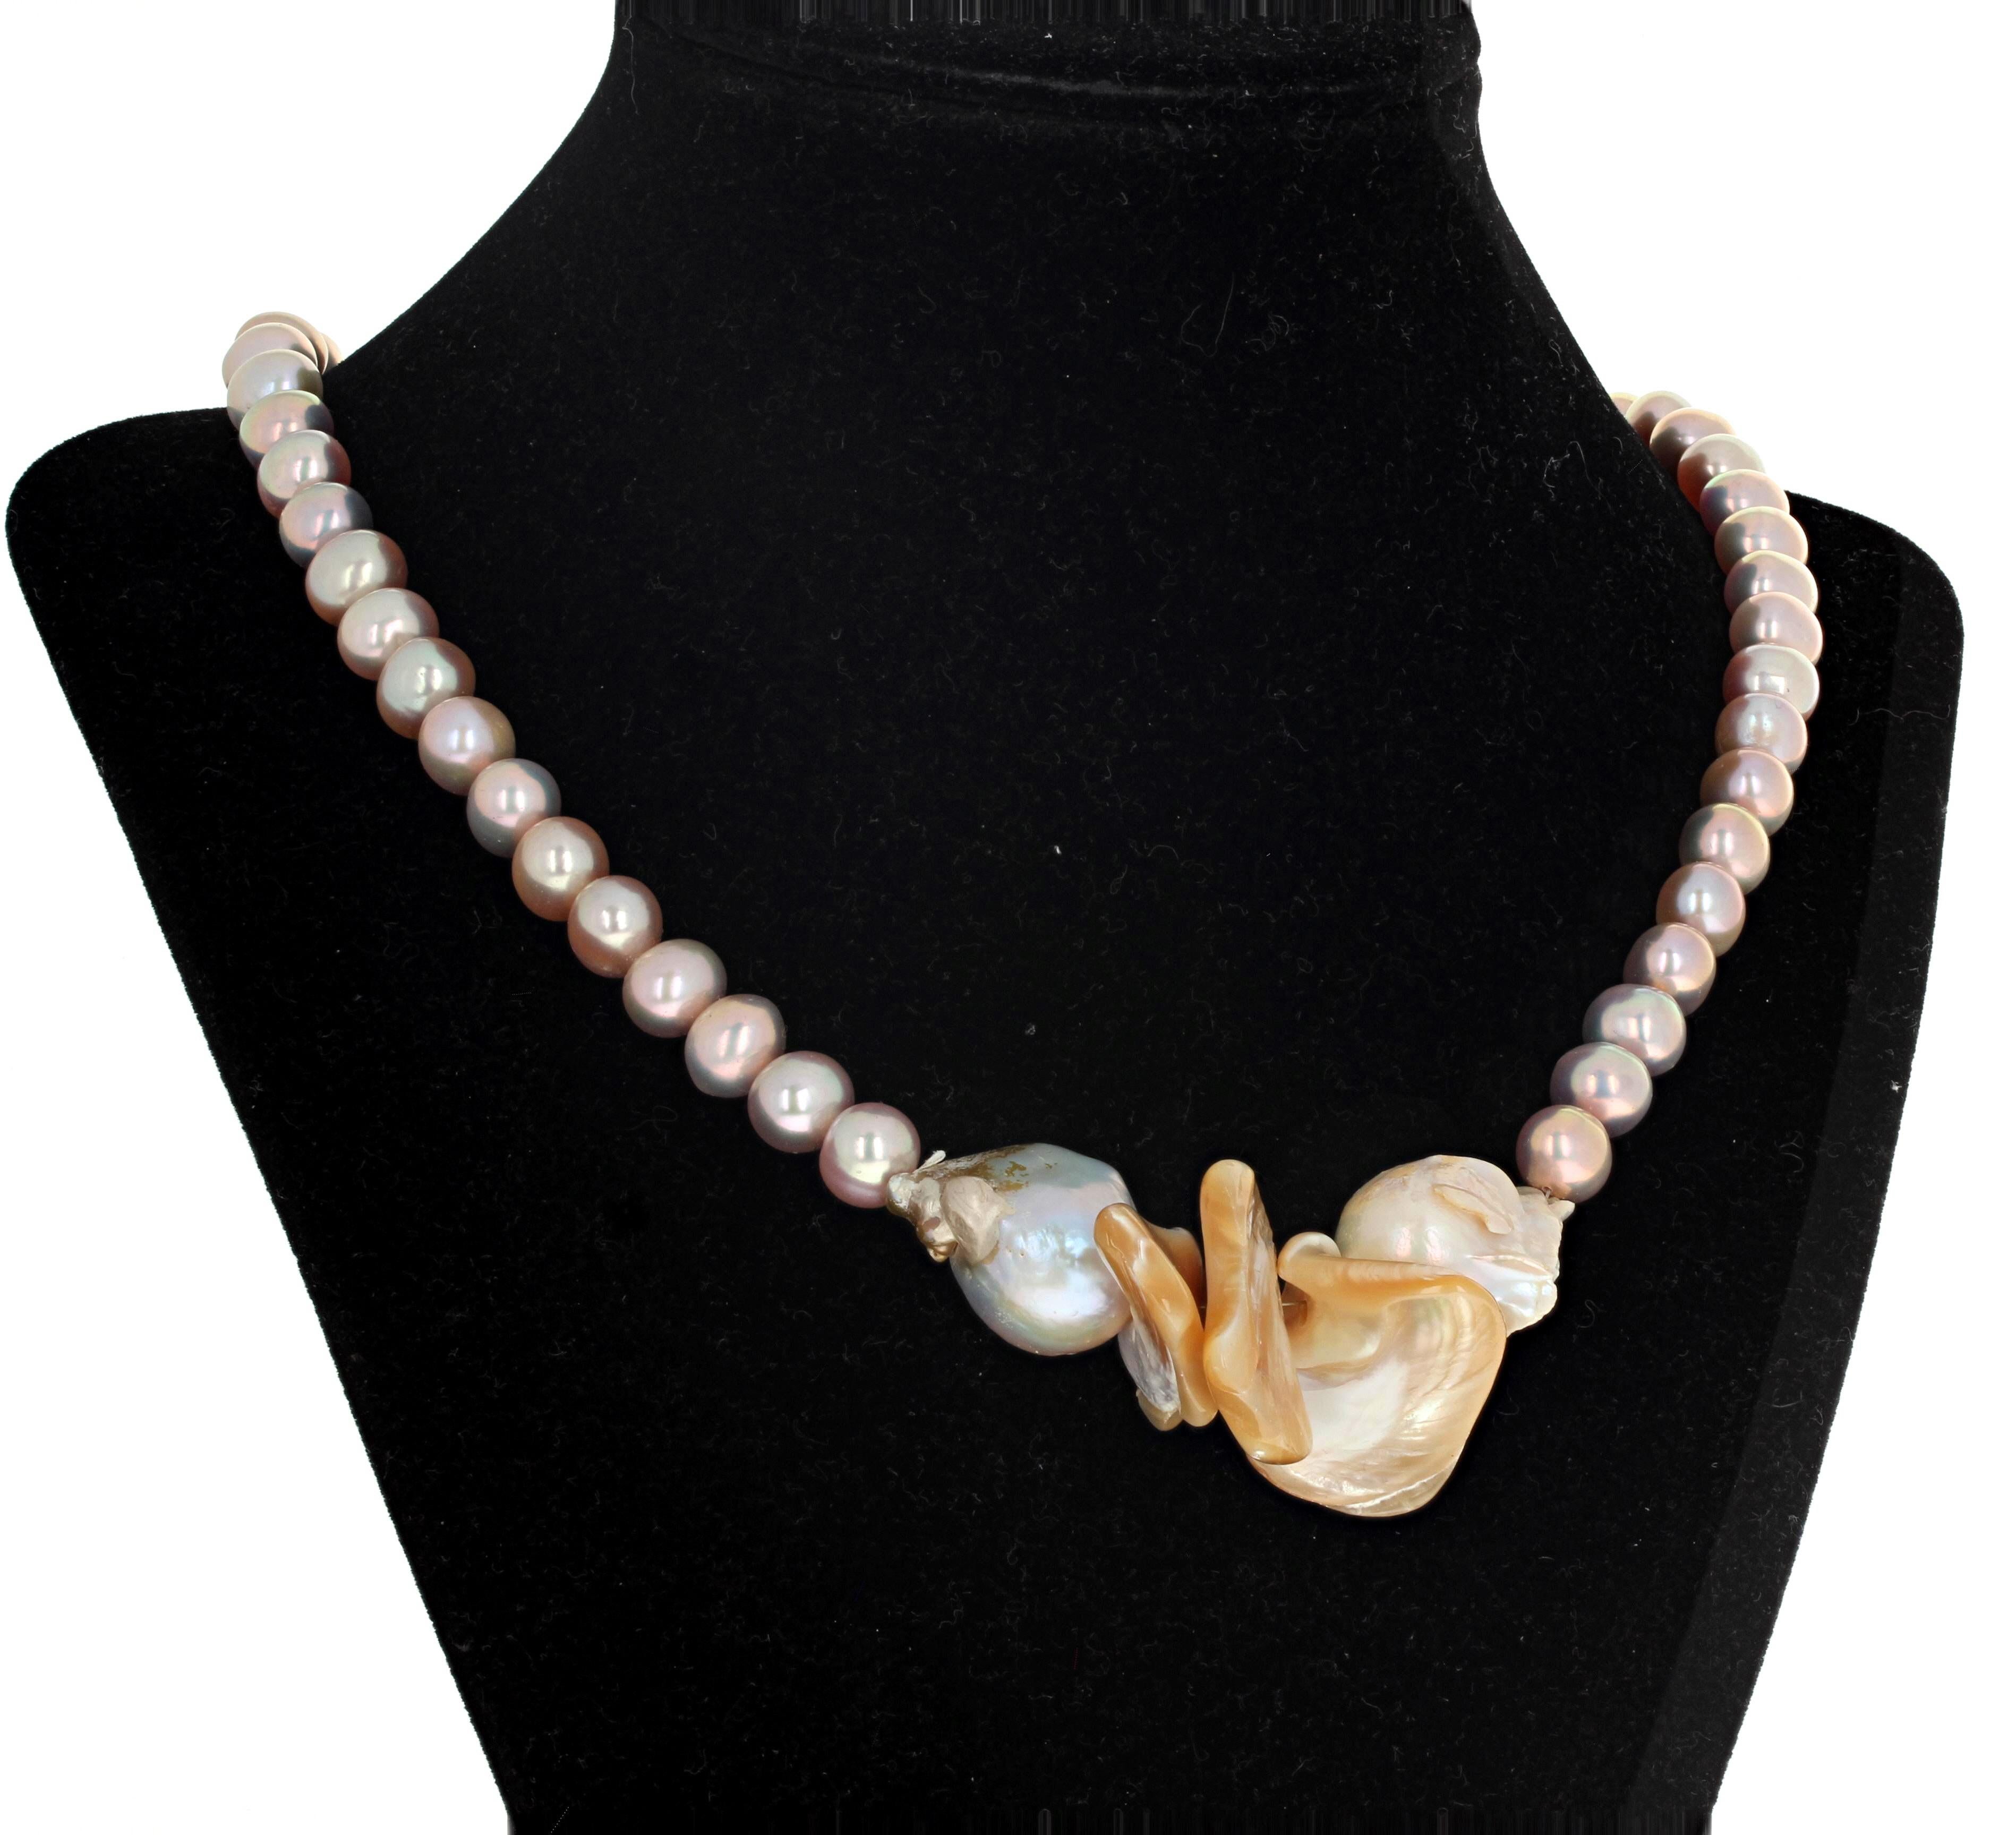 Women's or Men's AJD Dramatic Pinky Cultured Pearls & Goldy Pearl Shells Artistic Necklace